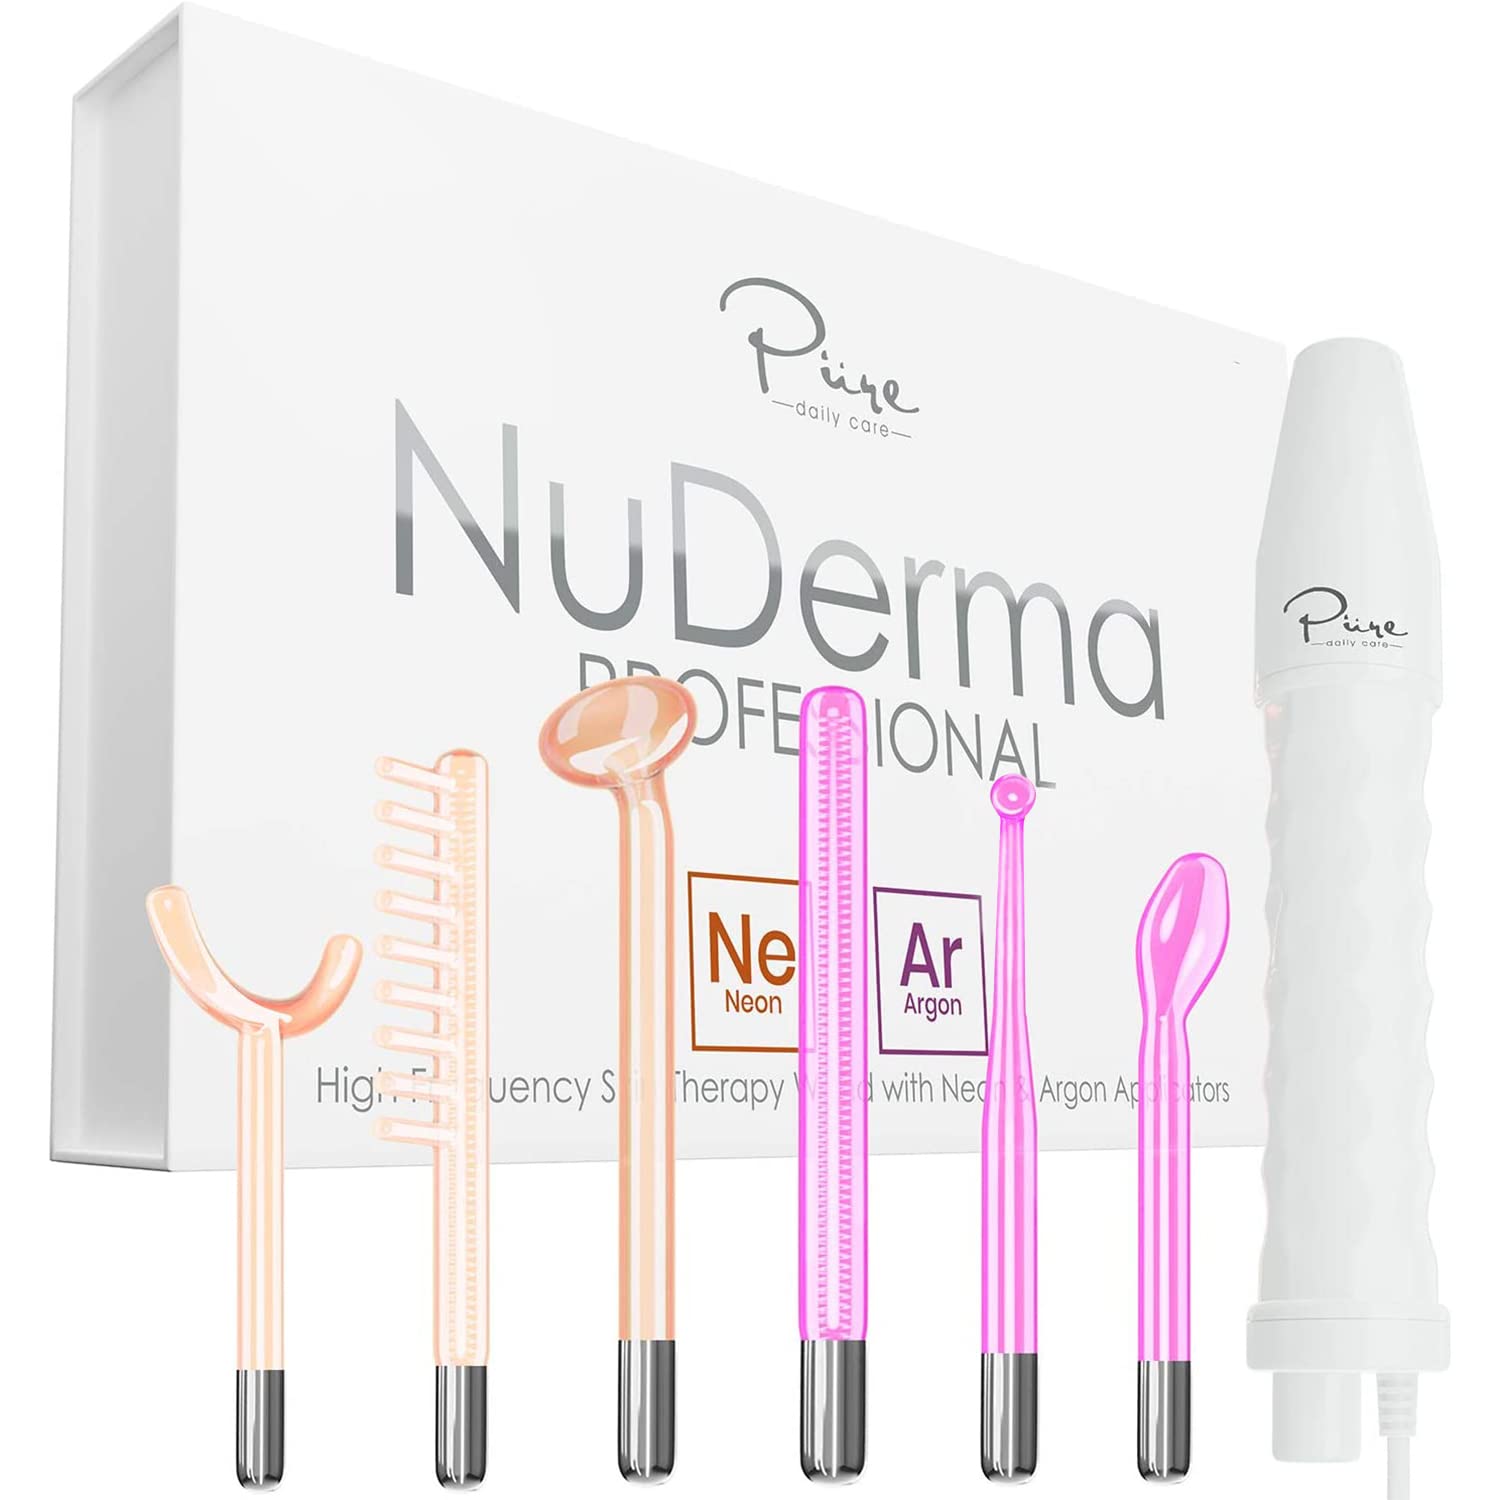 Pure Daily Care Nuderma Professional Skin Therapy Wand